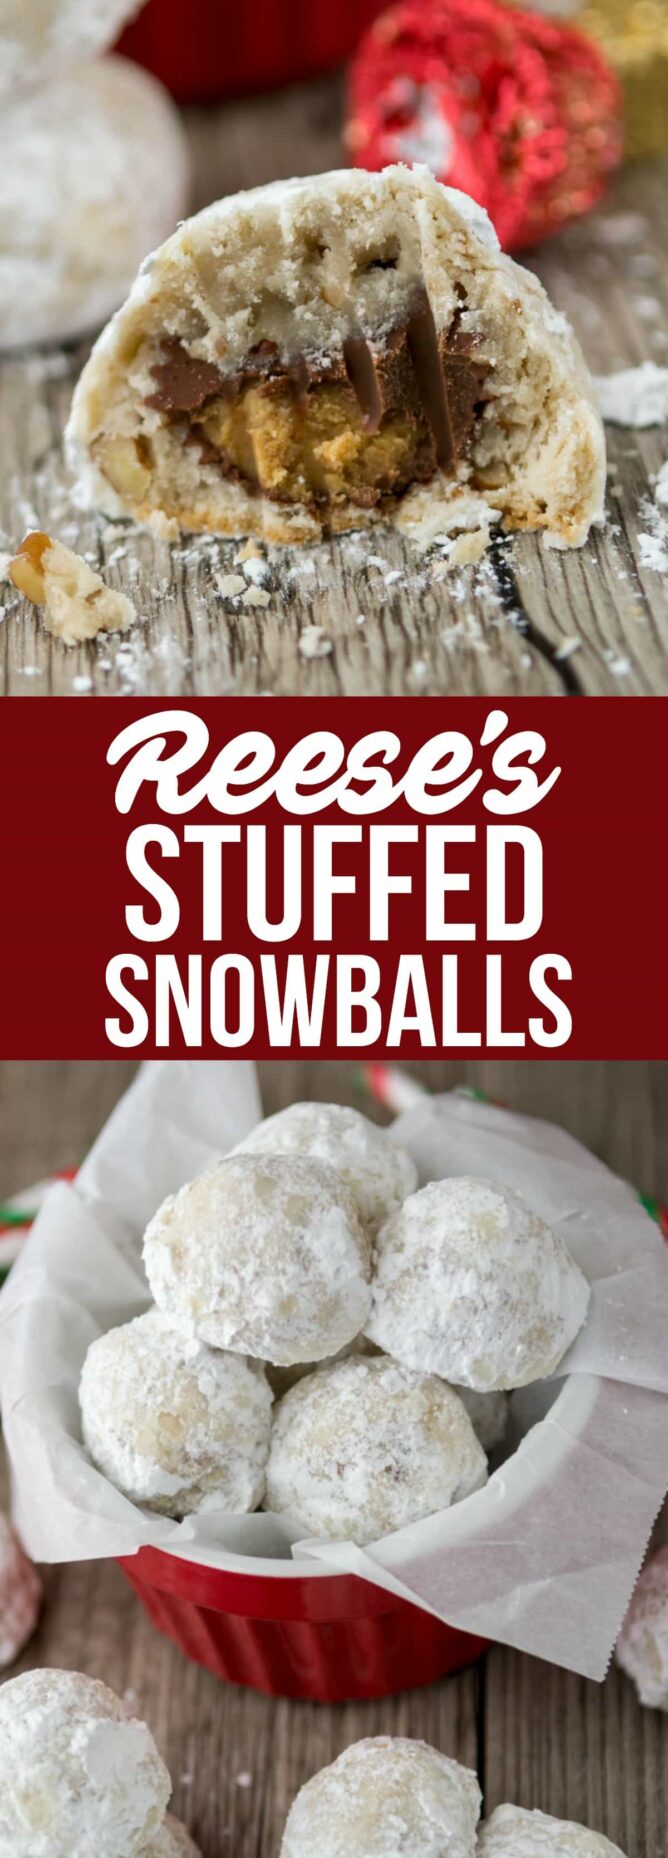 Collage of Reese's Stuffed Snowballs